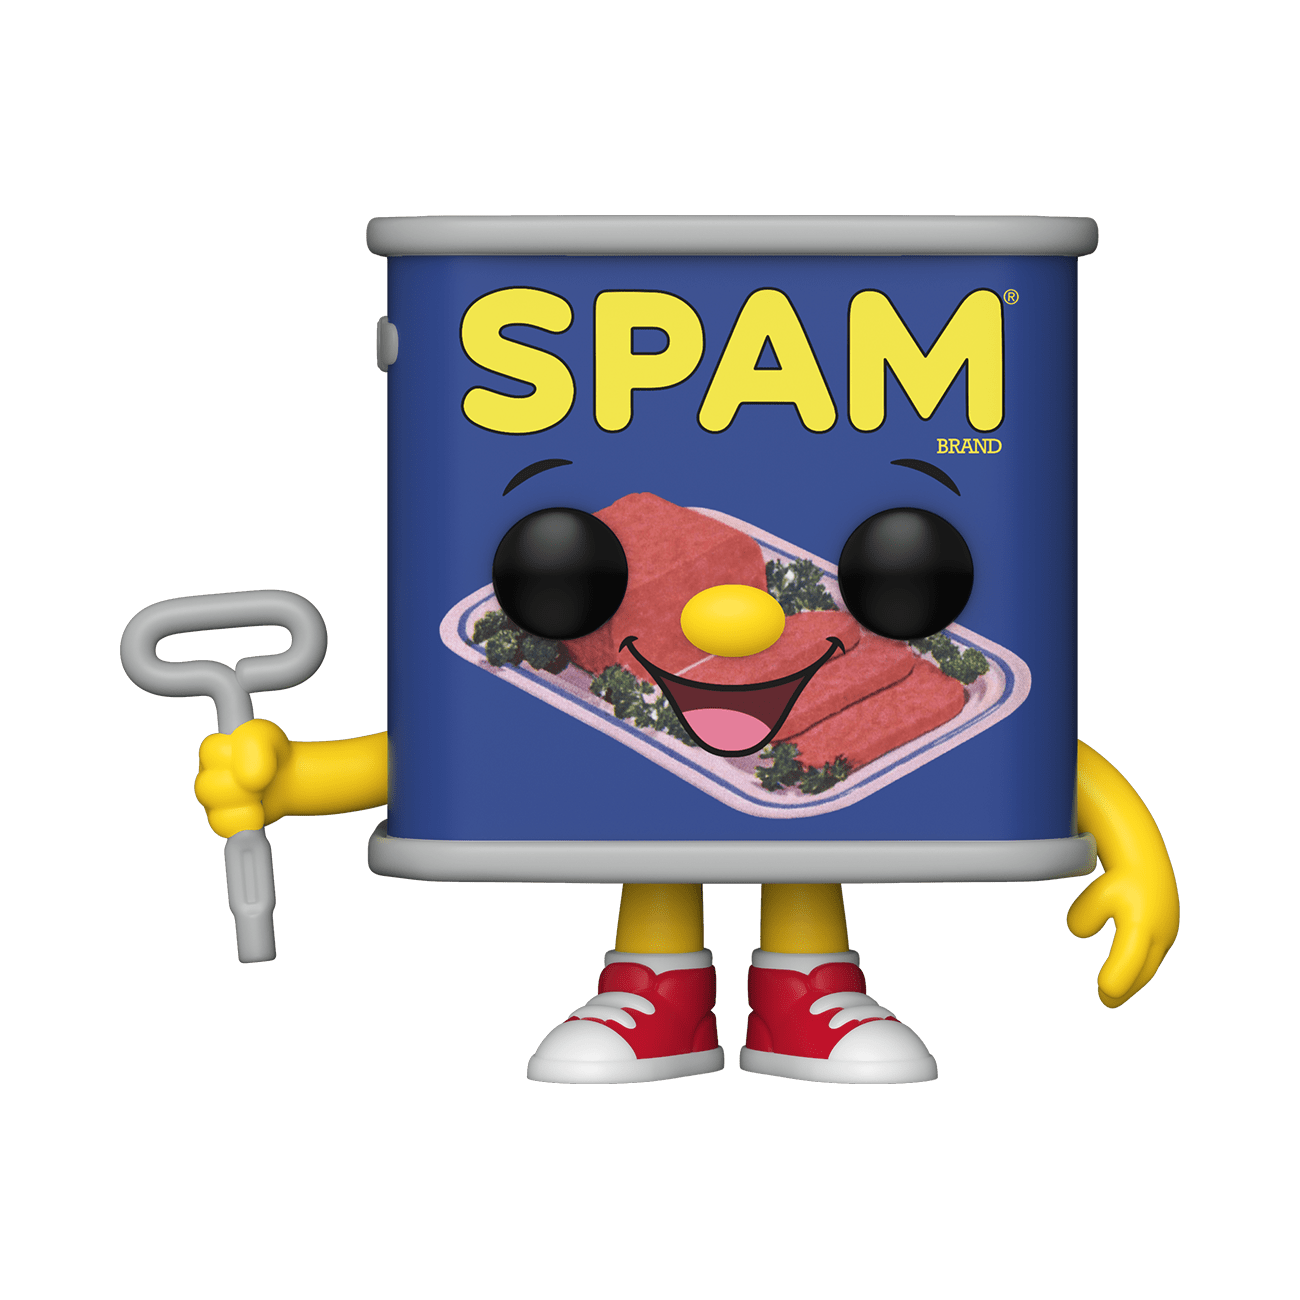 ad icons spam can funko